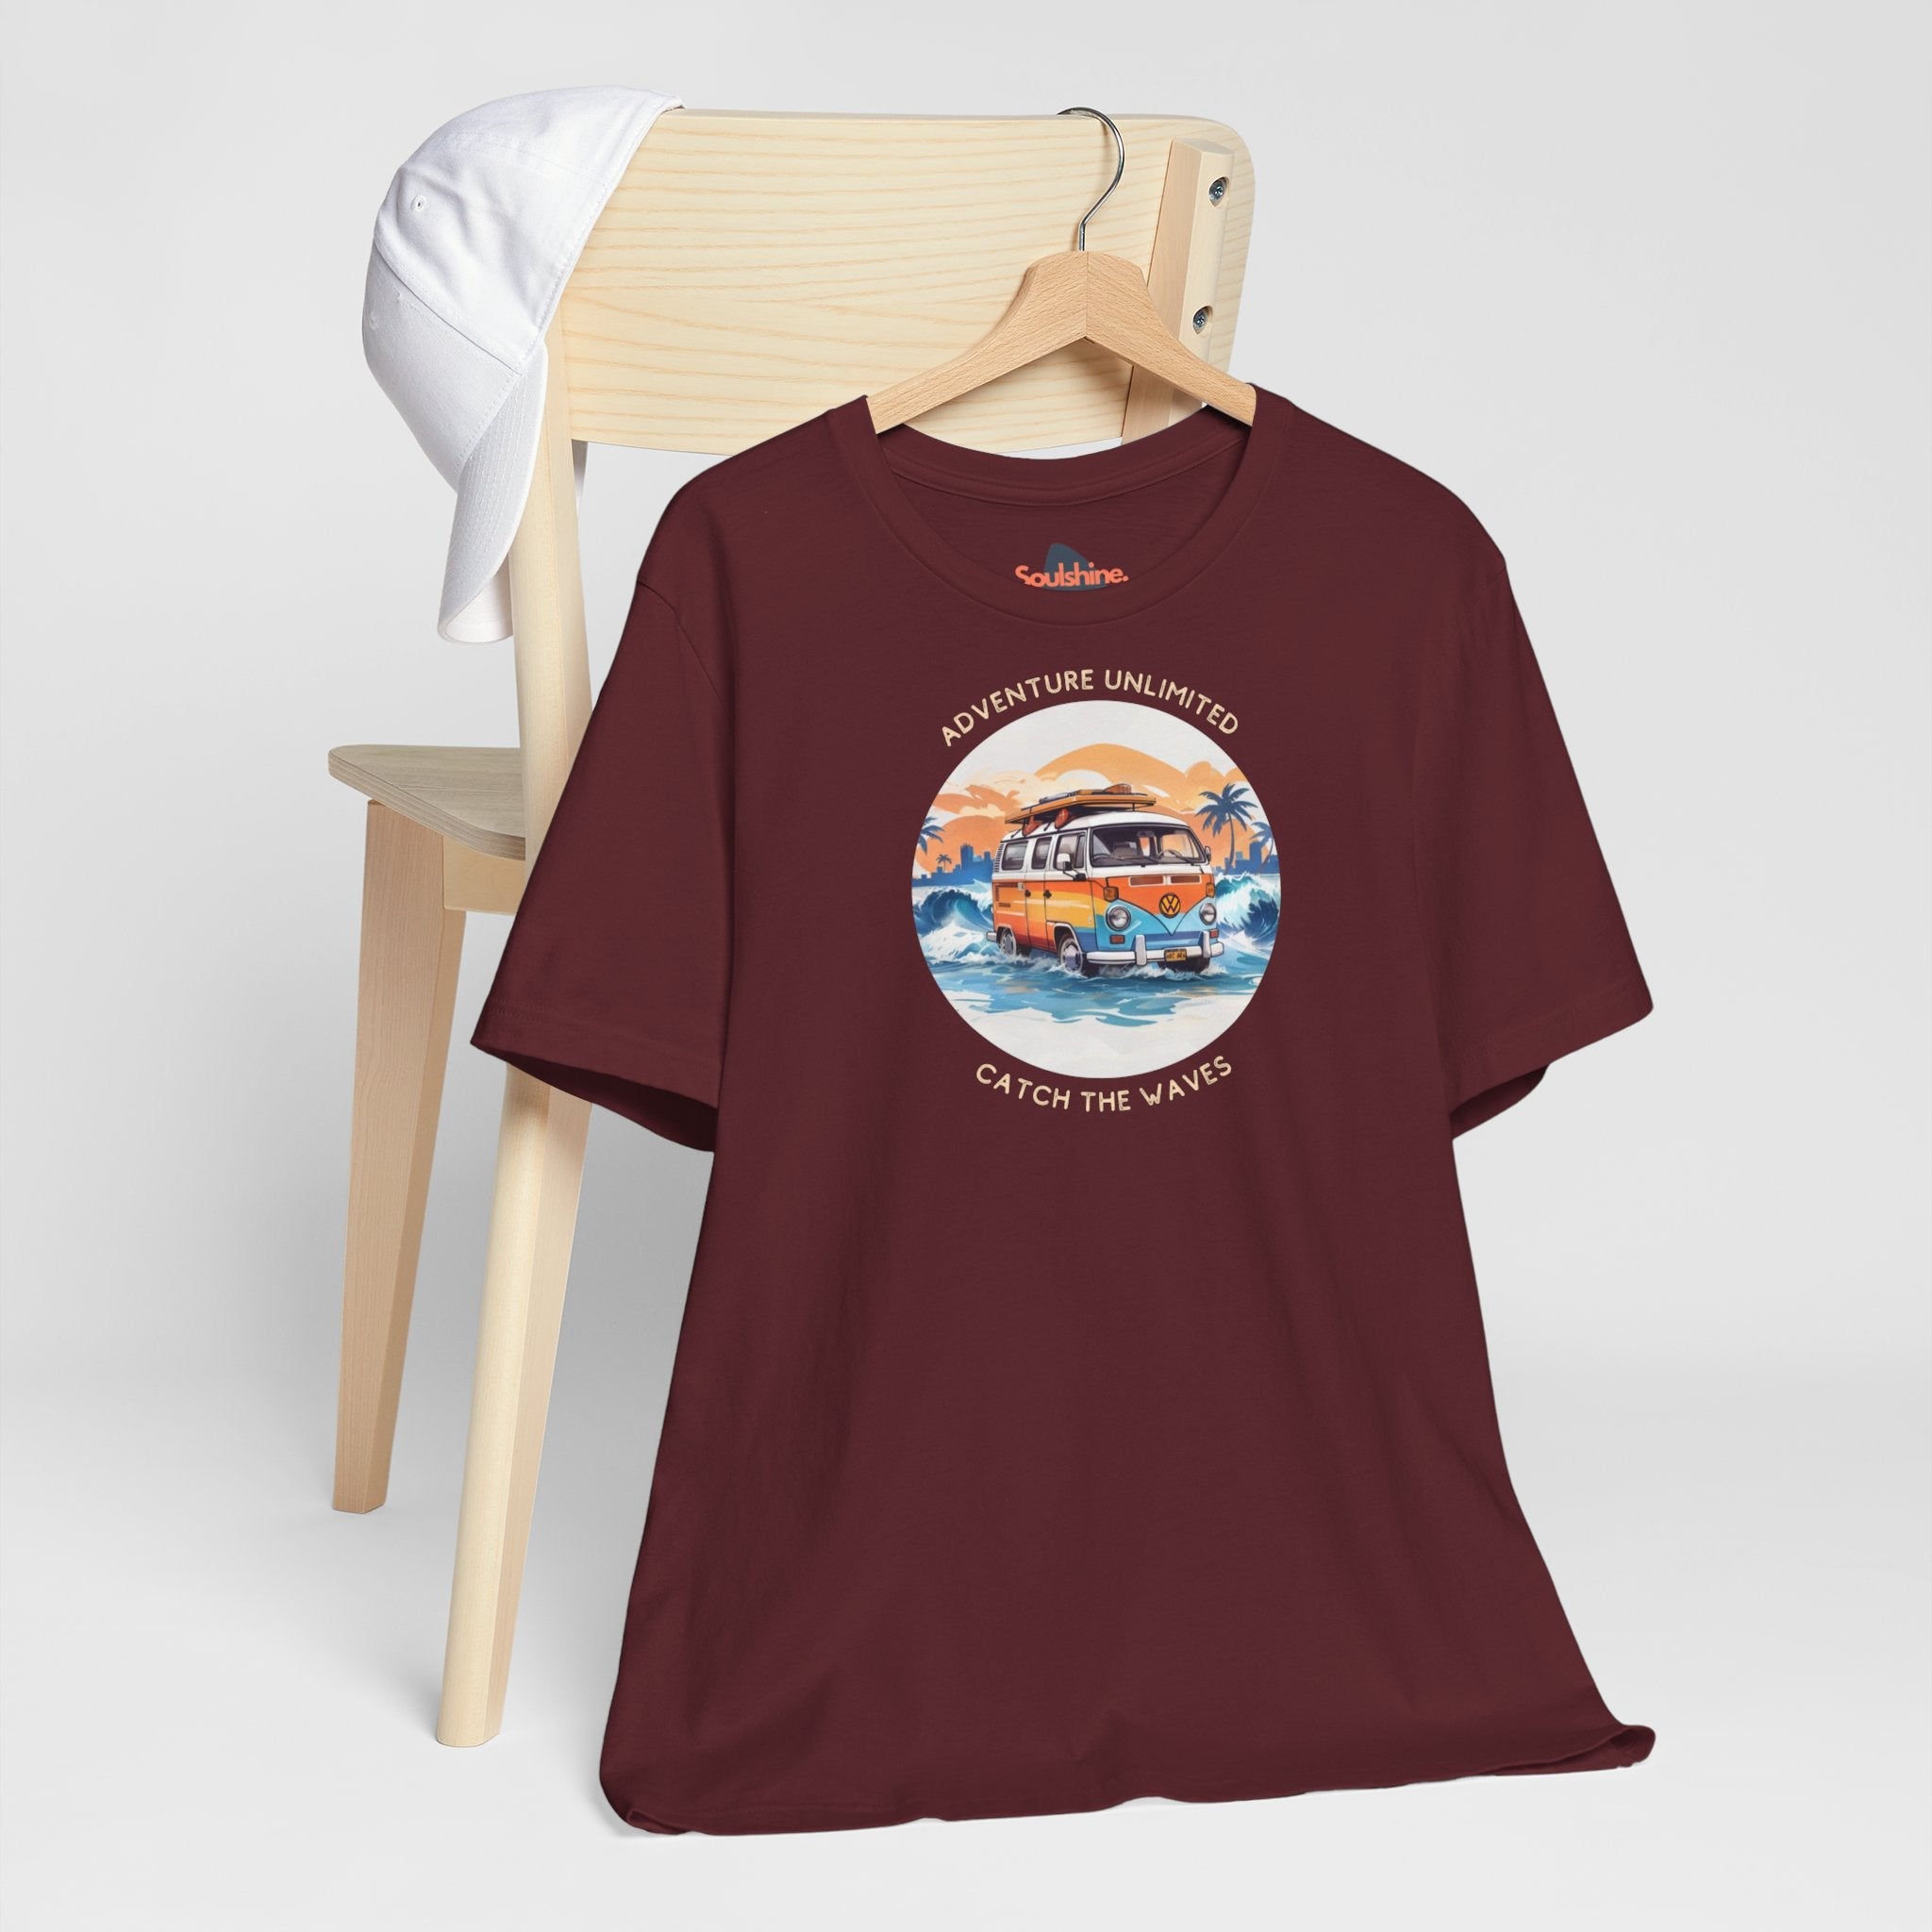 Adventure Unlimited Surfing T-Shirt printed on Bella & Canvas item